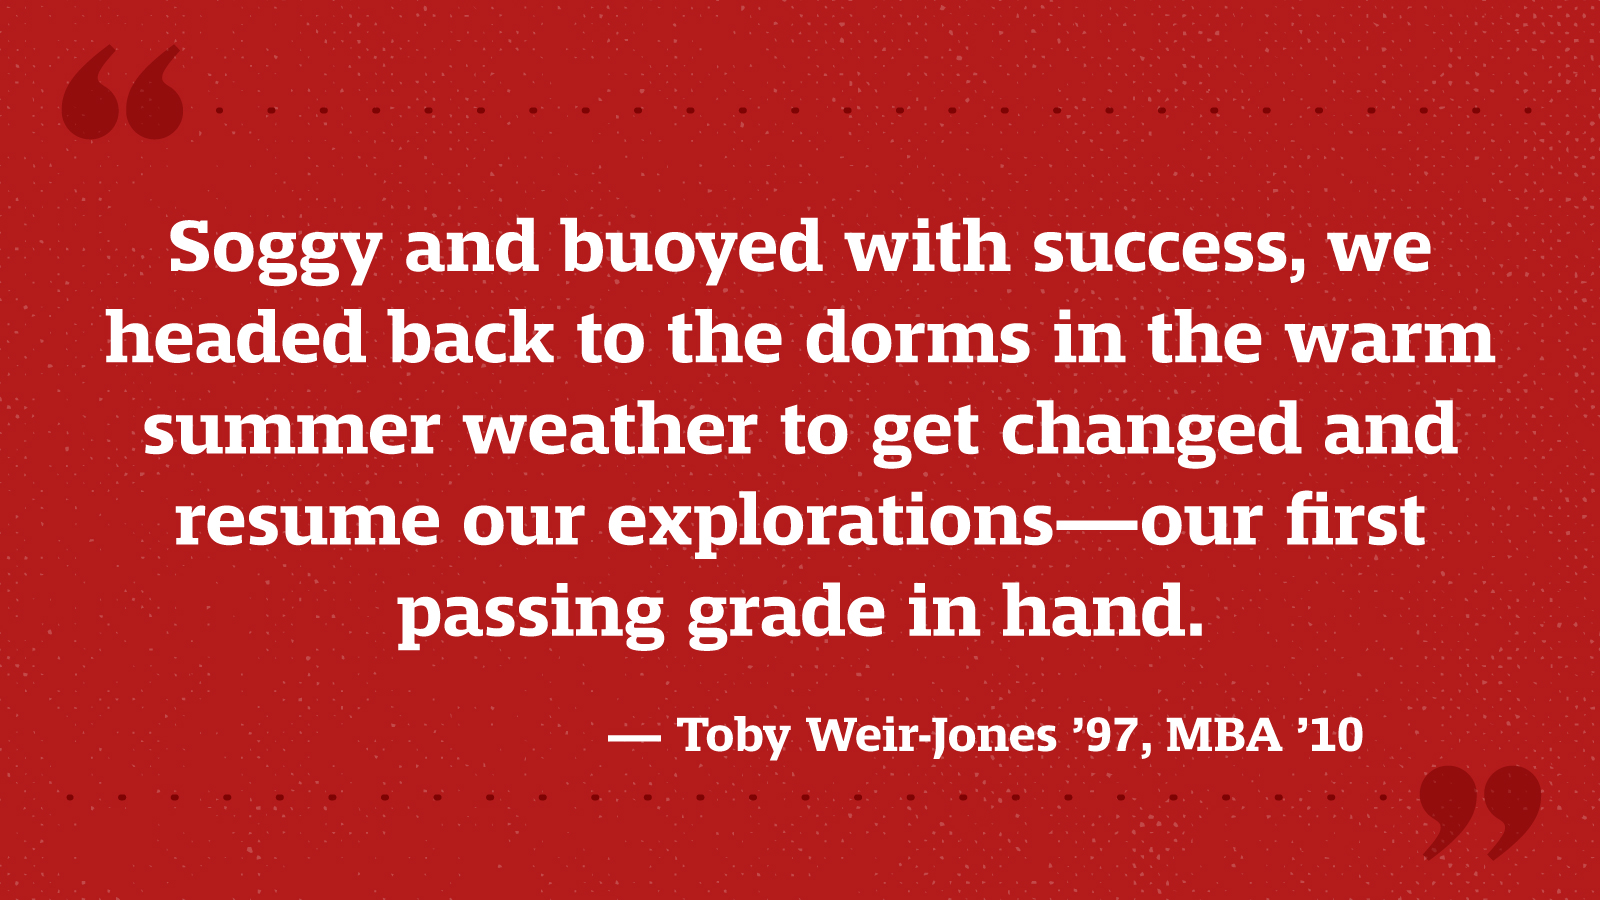 Soggy and buoyed with success, we headed back to the dorms in the warm summer weather to get changed and resume our explorations—our first passing grade in hand. — Toby Weir-Jones ’97, MBA ’10